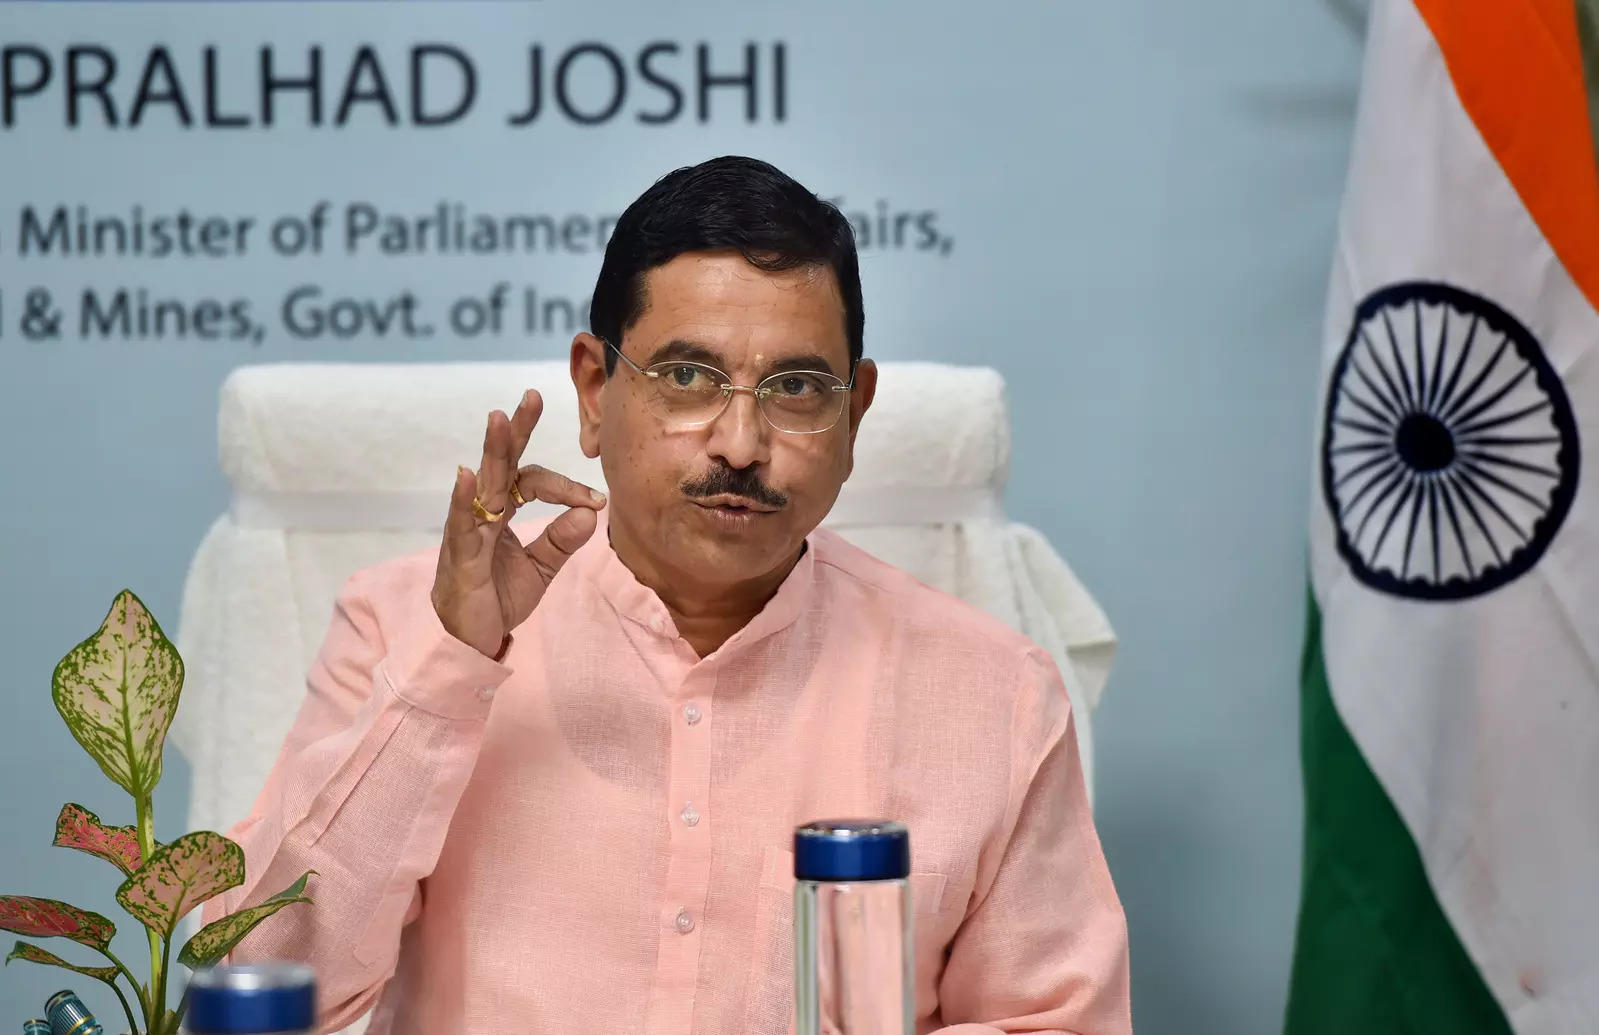 Union Minister Shri Pralhad Joshi to Launch Second Tranche of Auction of Critical and Strategic Mineral Blocks Tomorrow